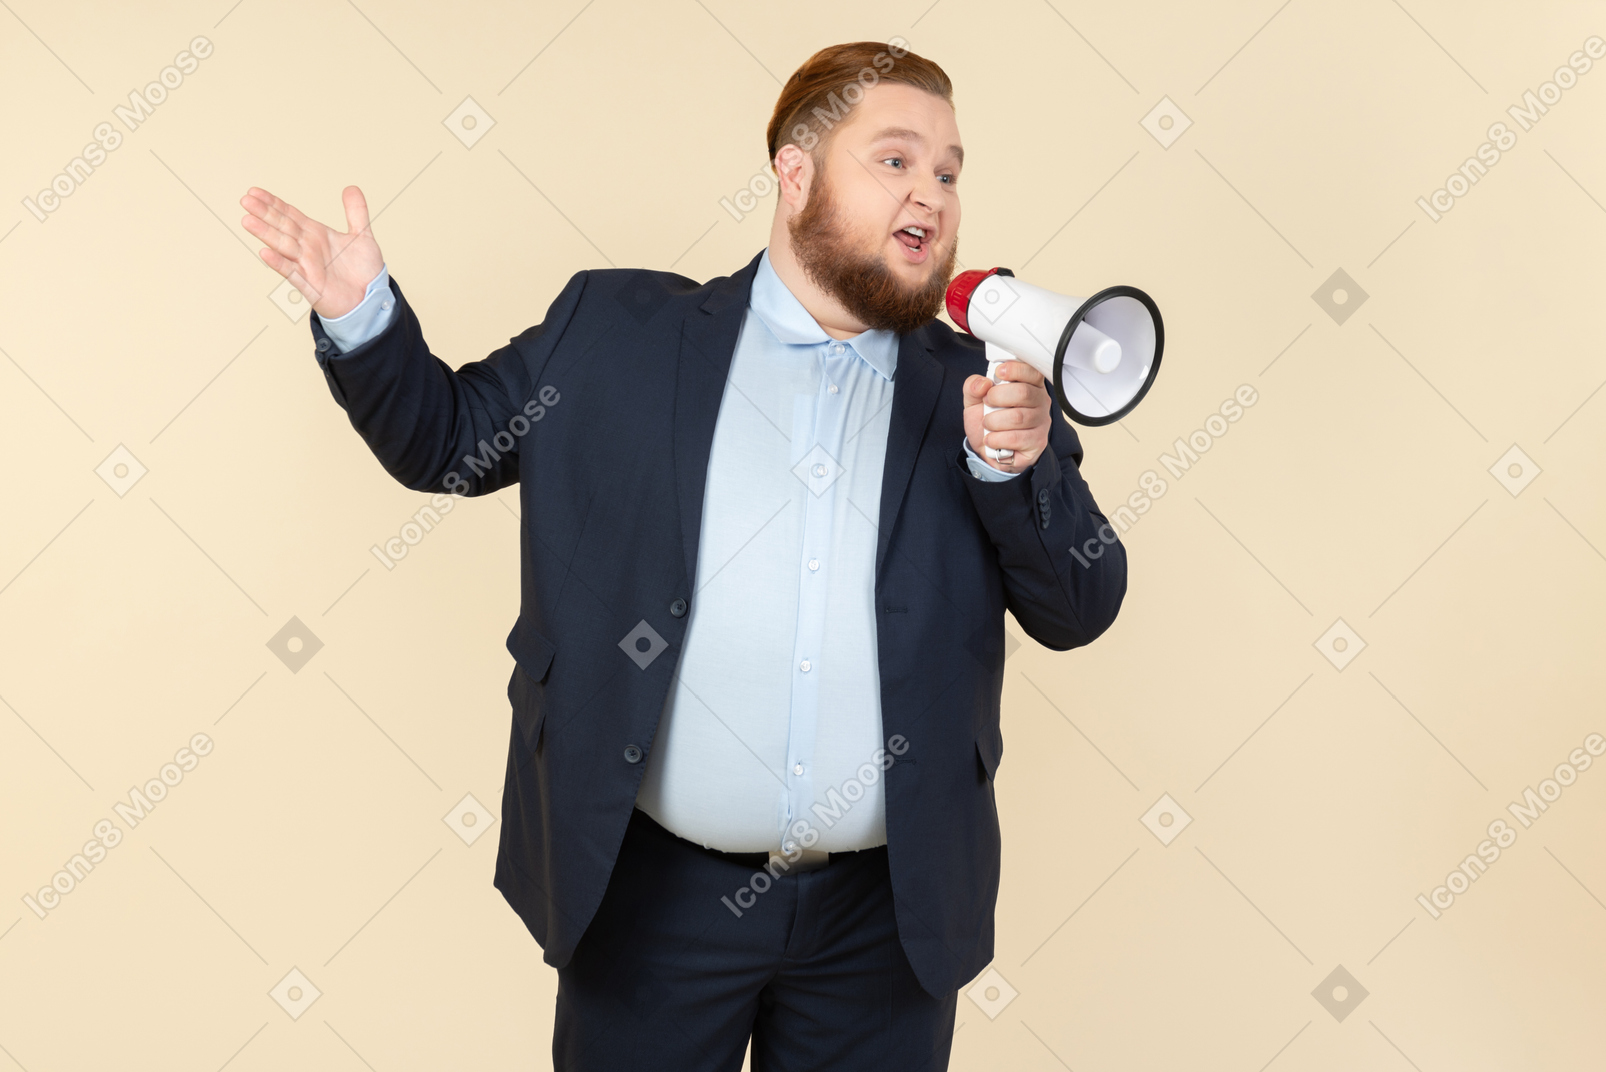 Young overweight office worker screaming using megaphone